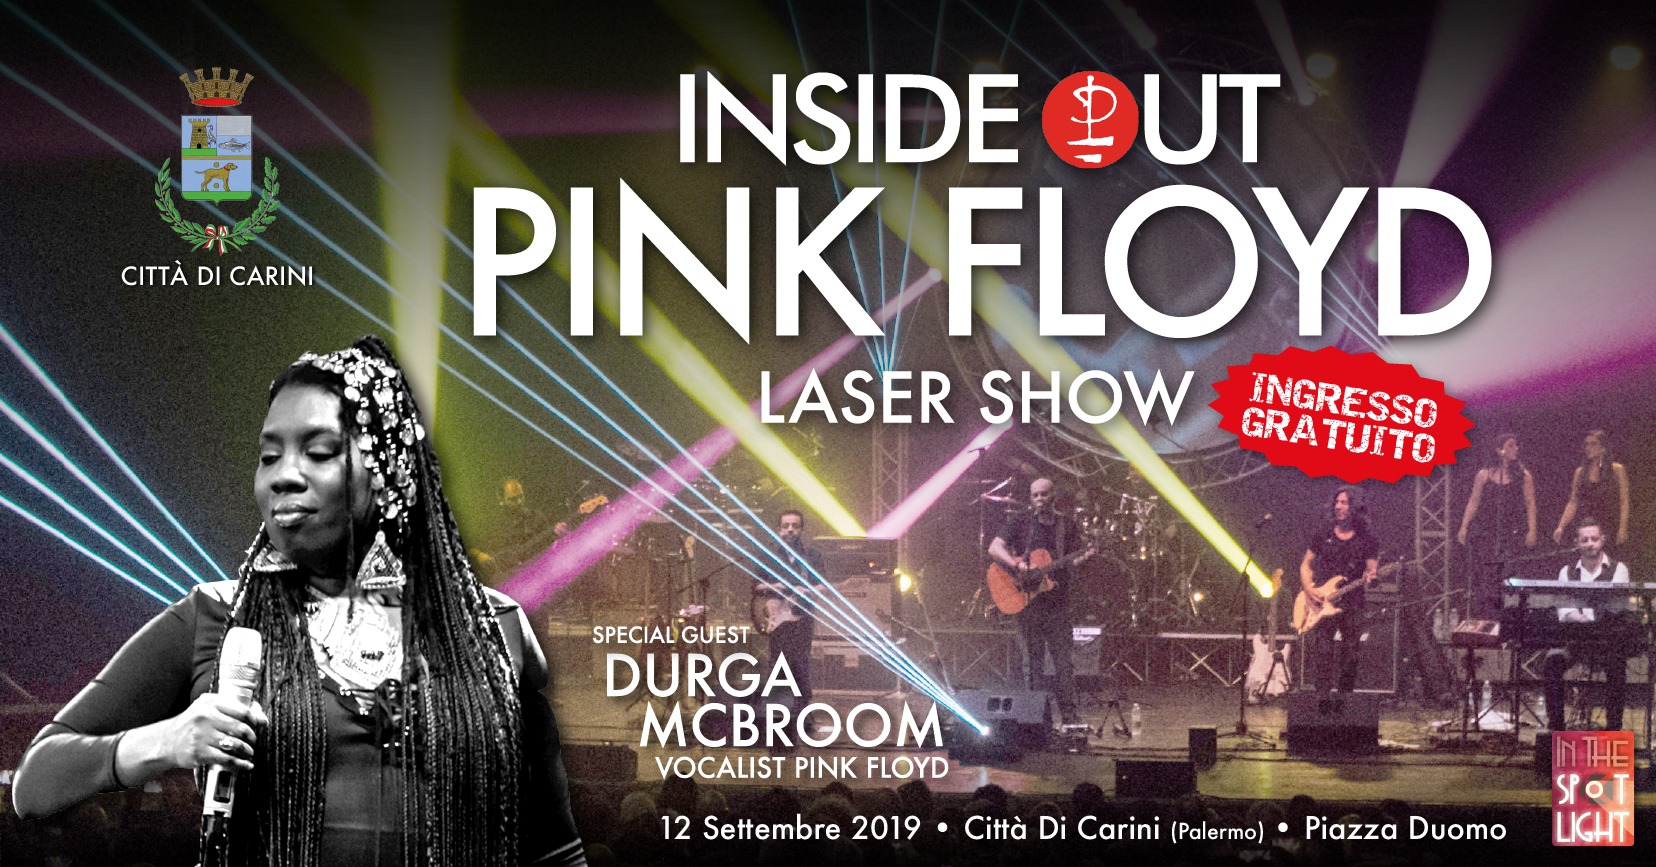 Pink Floyd Laser Show - Inside Out and Durga McBroom - 12 settembre 2019 - In The Spot Light